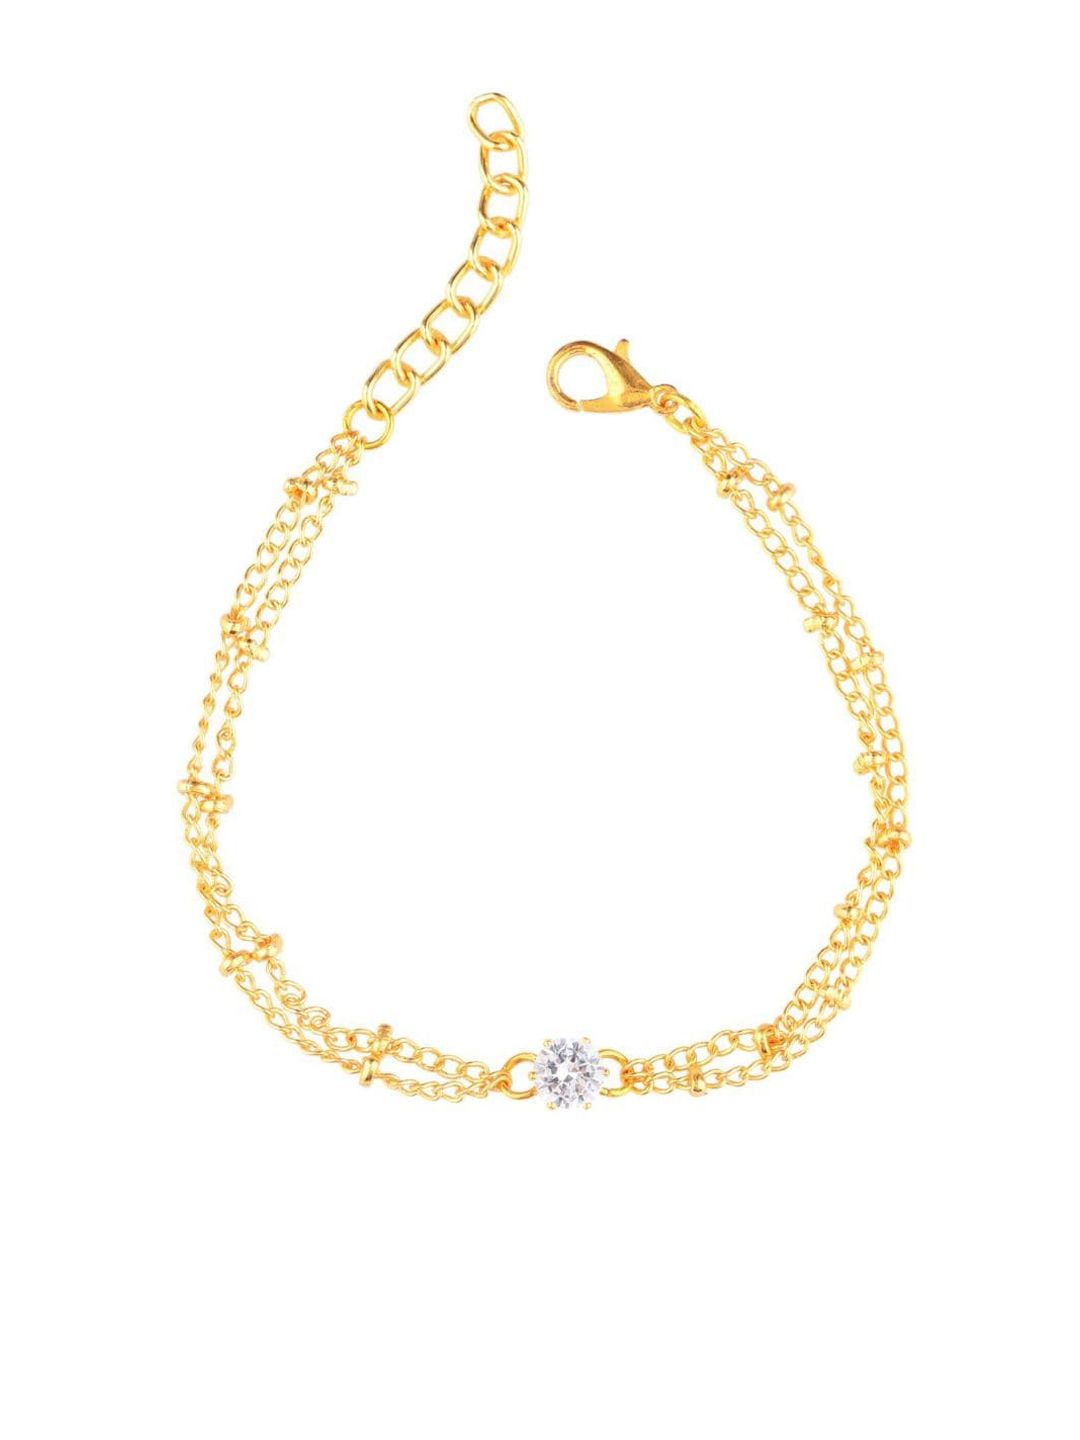 Efulgenz Women Gold-Plated & Silver-Toned Cubic Zirconia Charm Bracelet Price in India